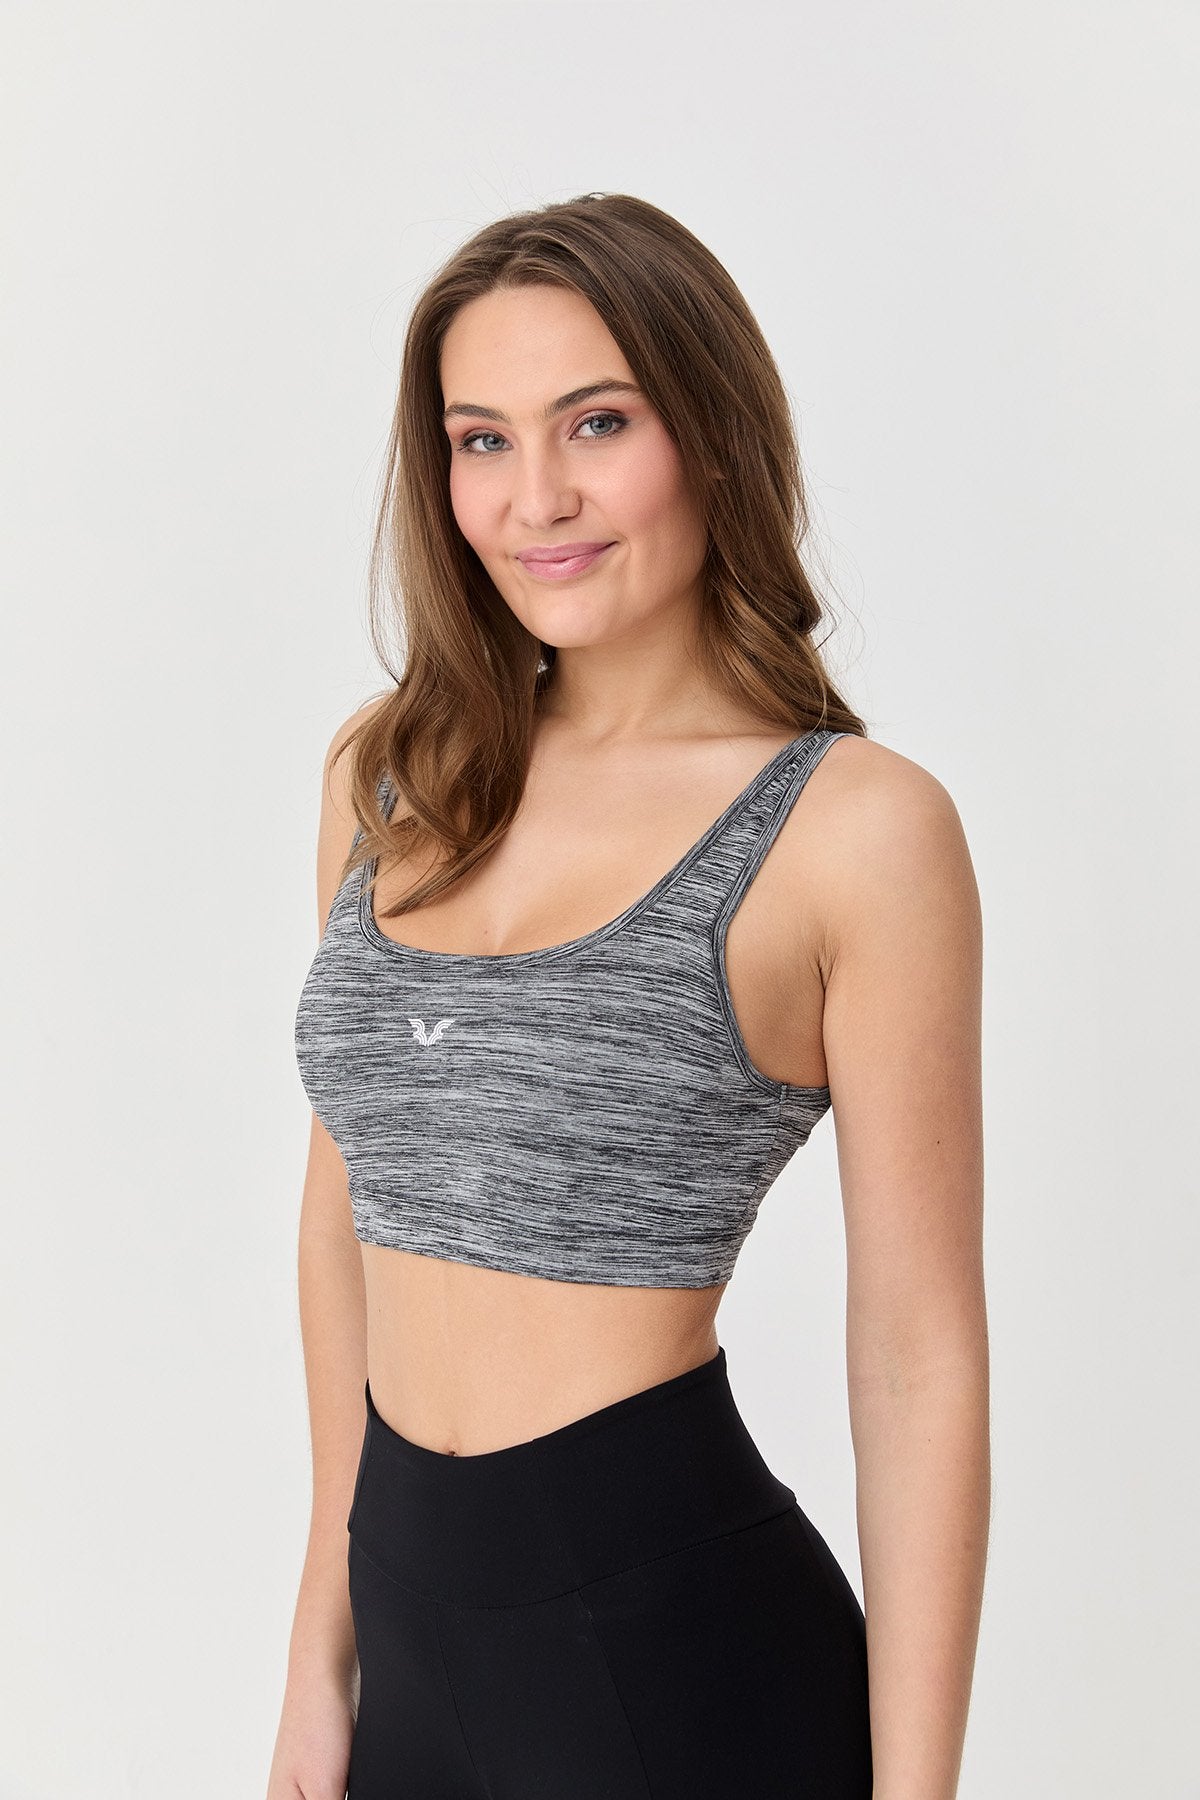 Women Sports Bra Models and Prices - Bilcee